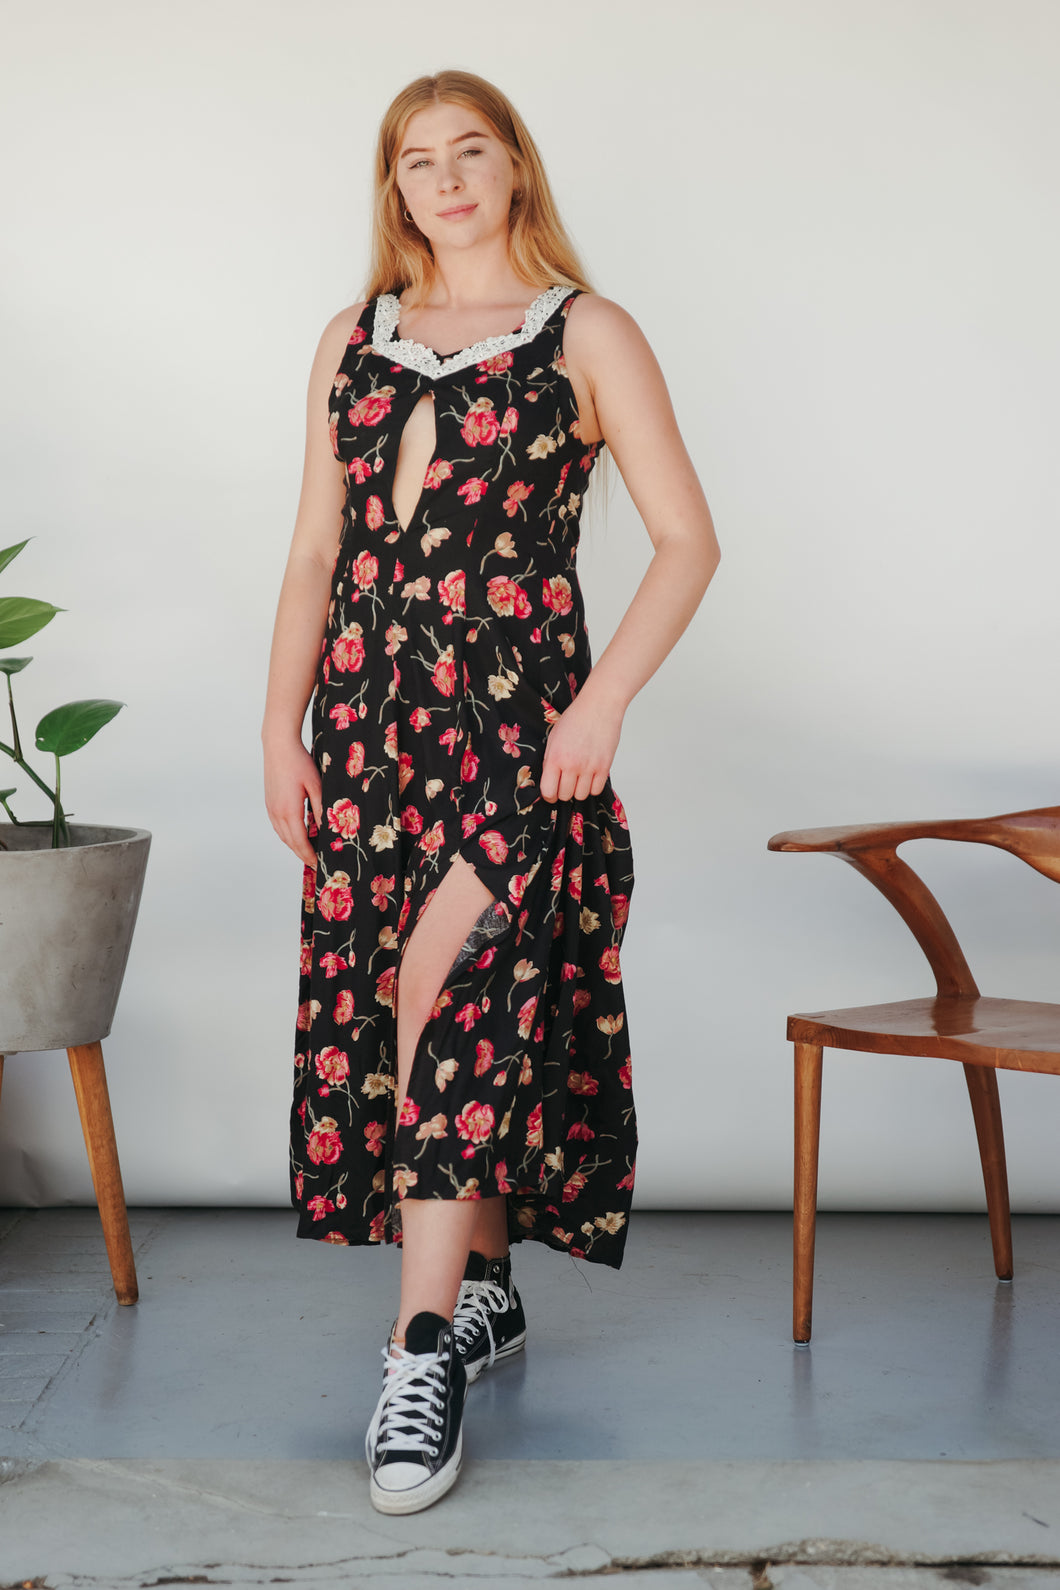 Transformed 1980’s dress - modified + reworked vintage fashion - “Your Floral Compass